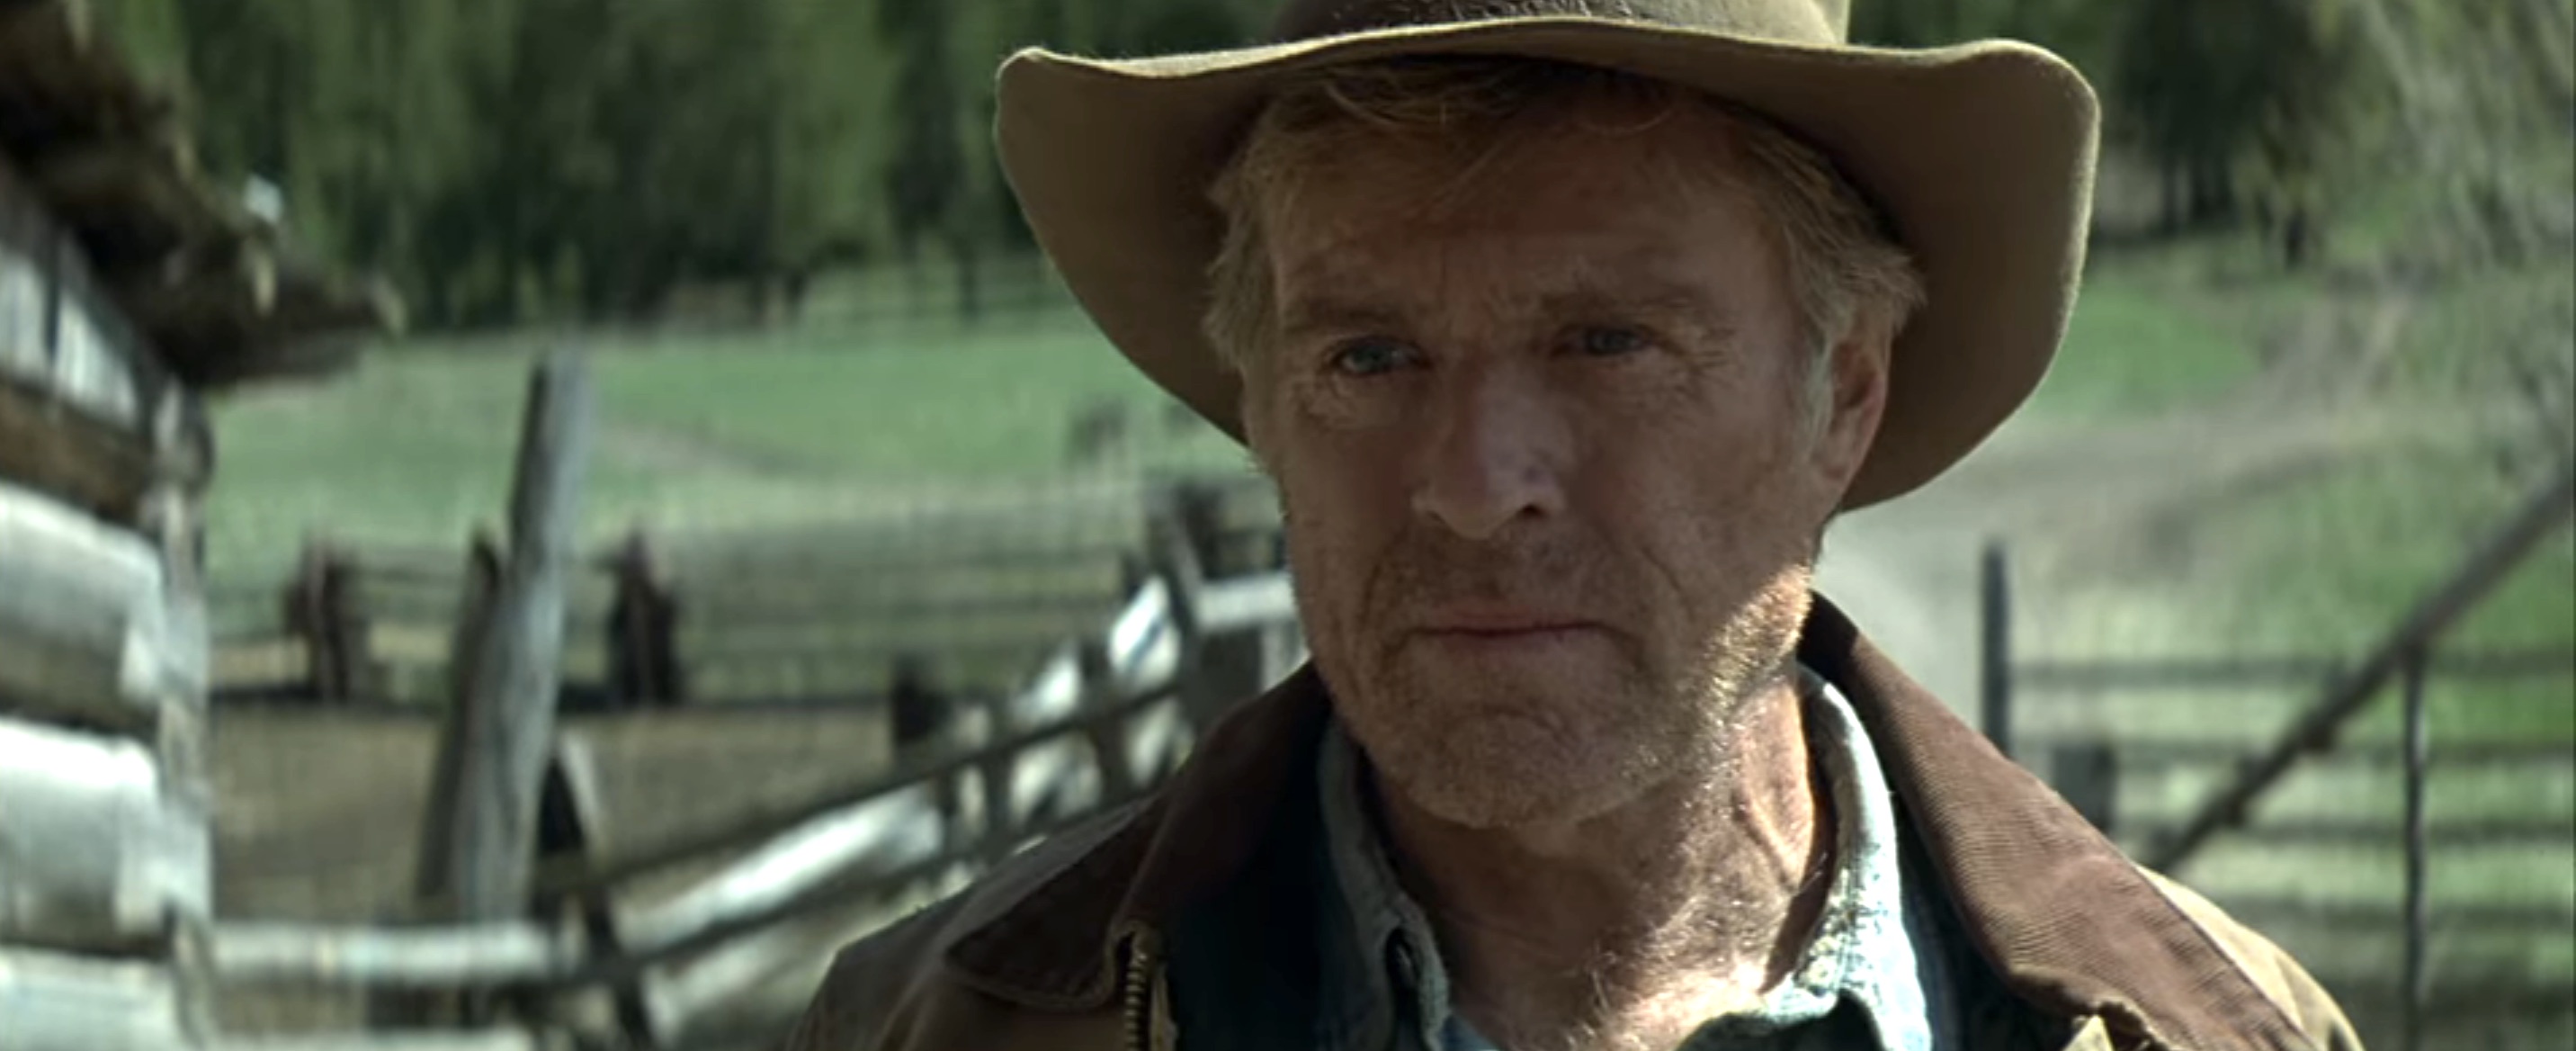 An Unfinished Life Cast - Robert Redford as Einar Gilkyson